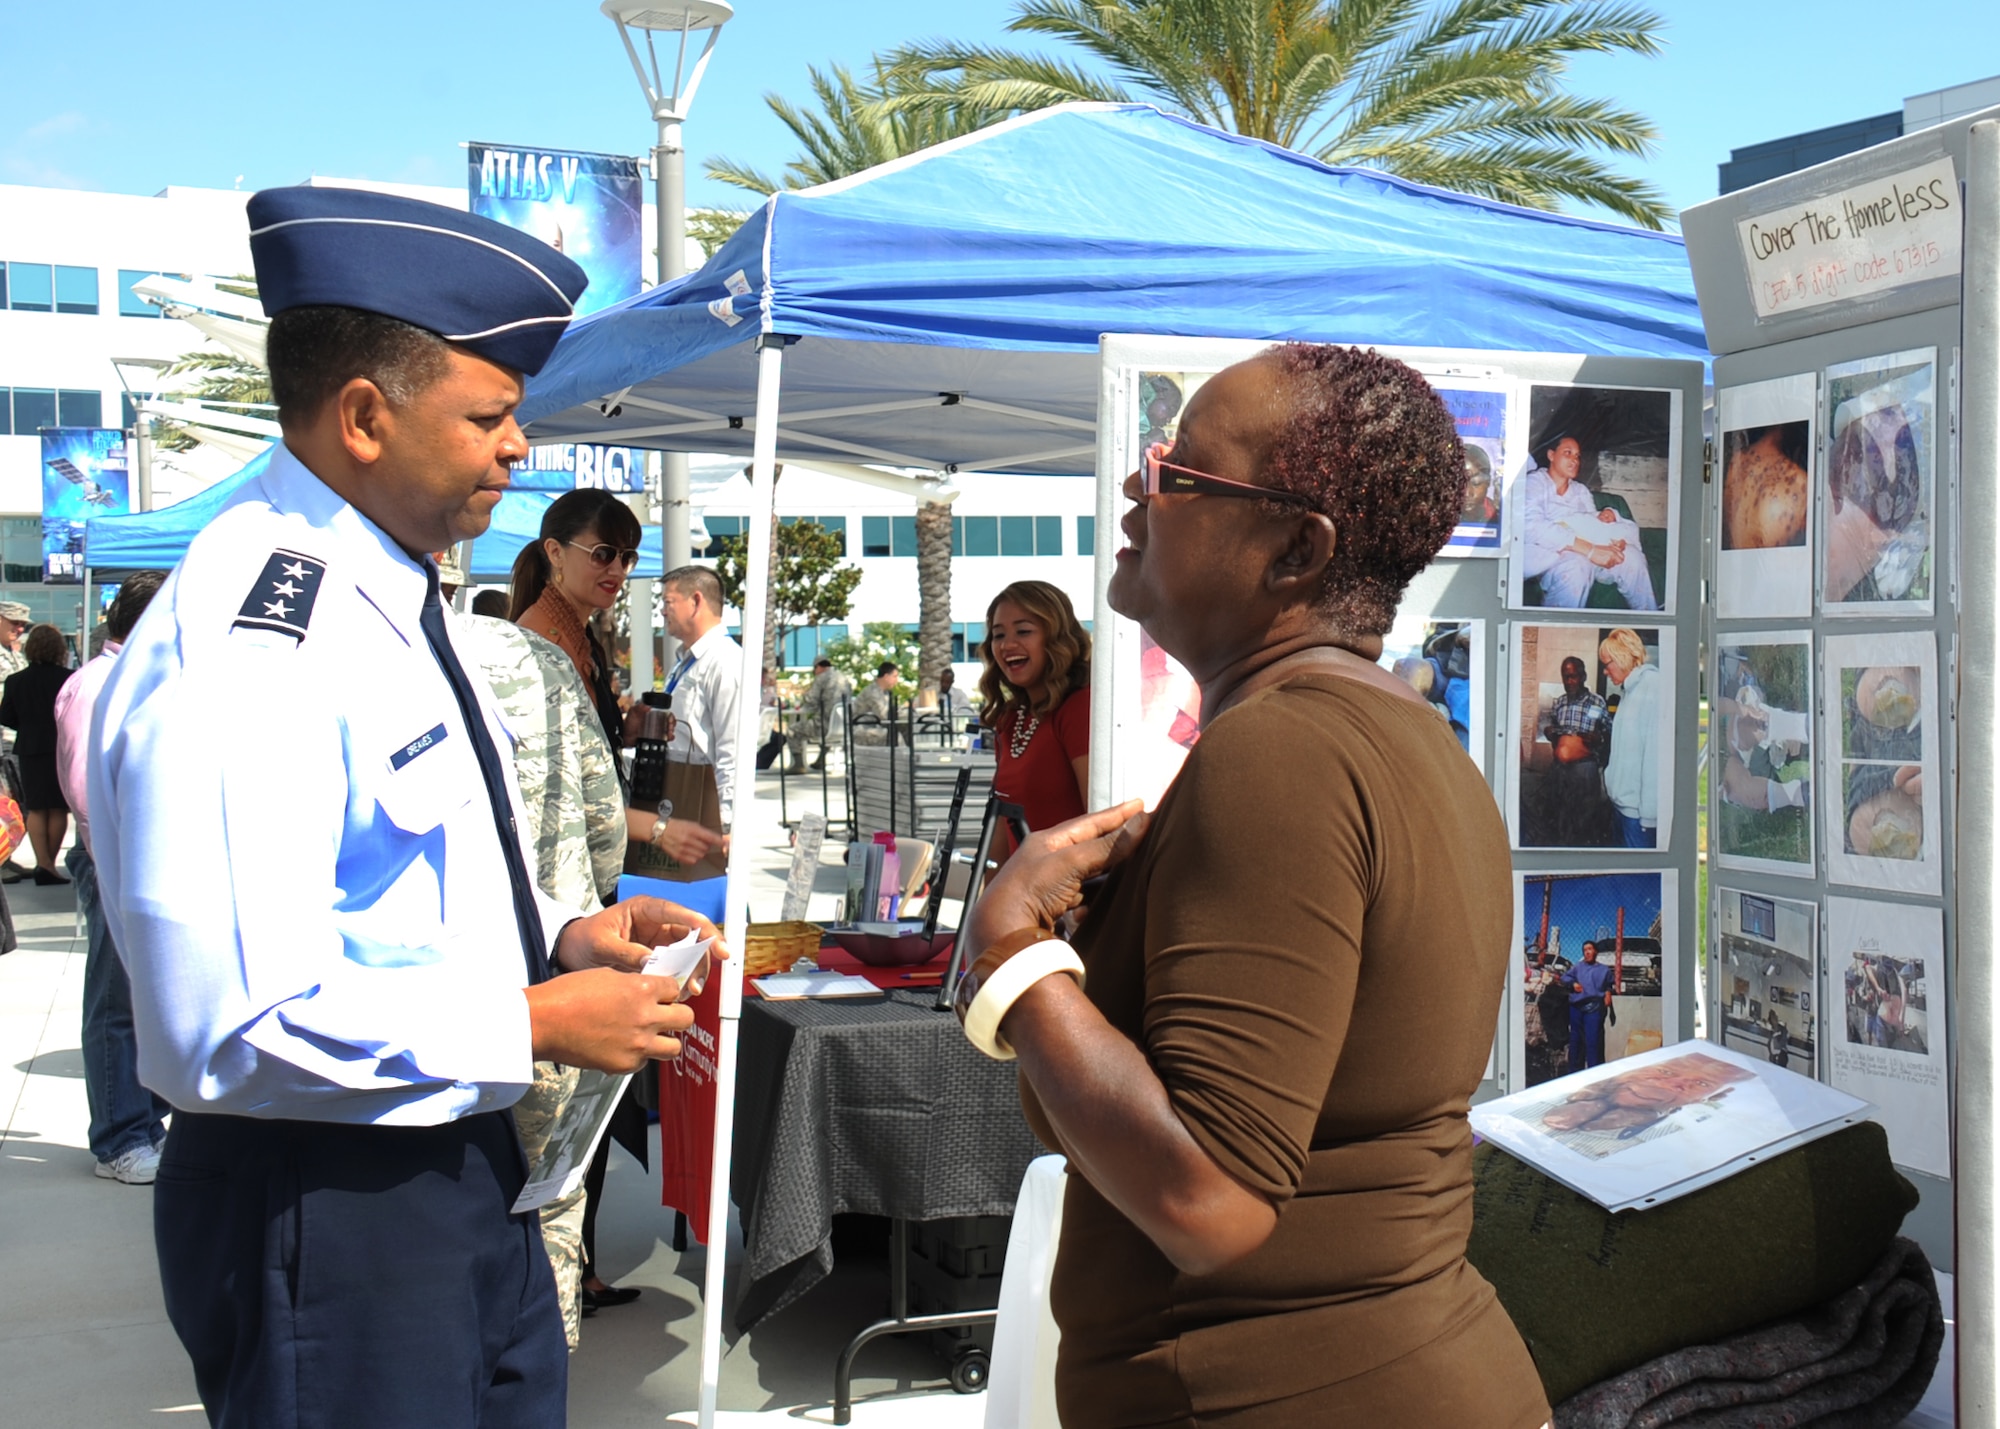 Lt. Gen. Samuel Greaves, SMC commander, talks with a representative from Cover the Homeless about her charity. The organization provides blankets, food clothing and transportation to homeless people in the Los Angeles area. (U.S Air Force photo by Van Ha)